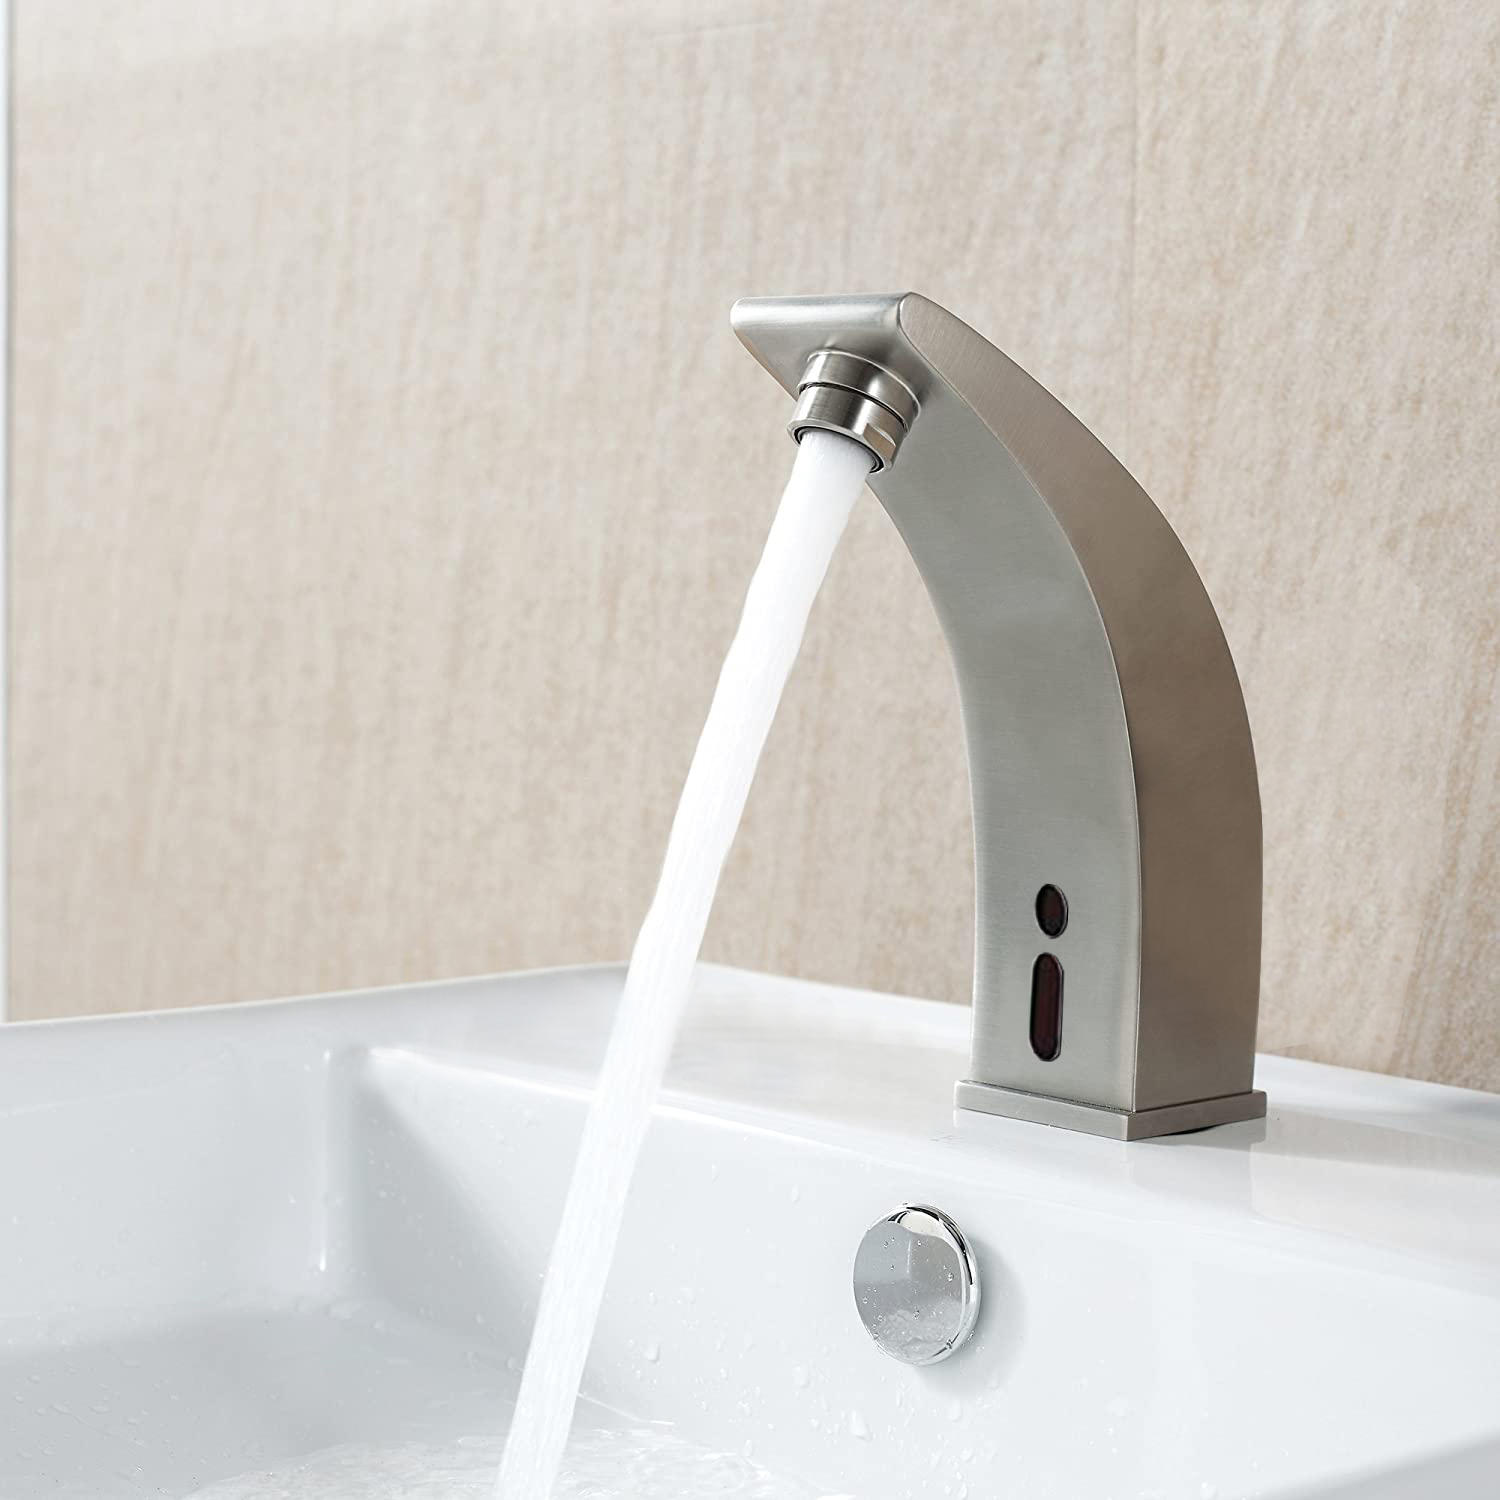 Bathselect Automatic Commercial Brushed Nickel Sensor Faucet Working 